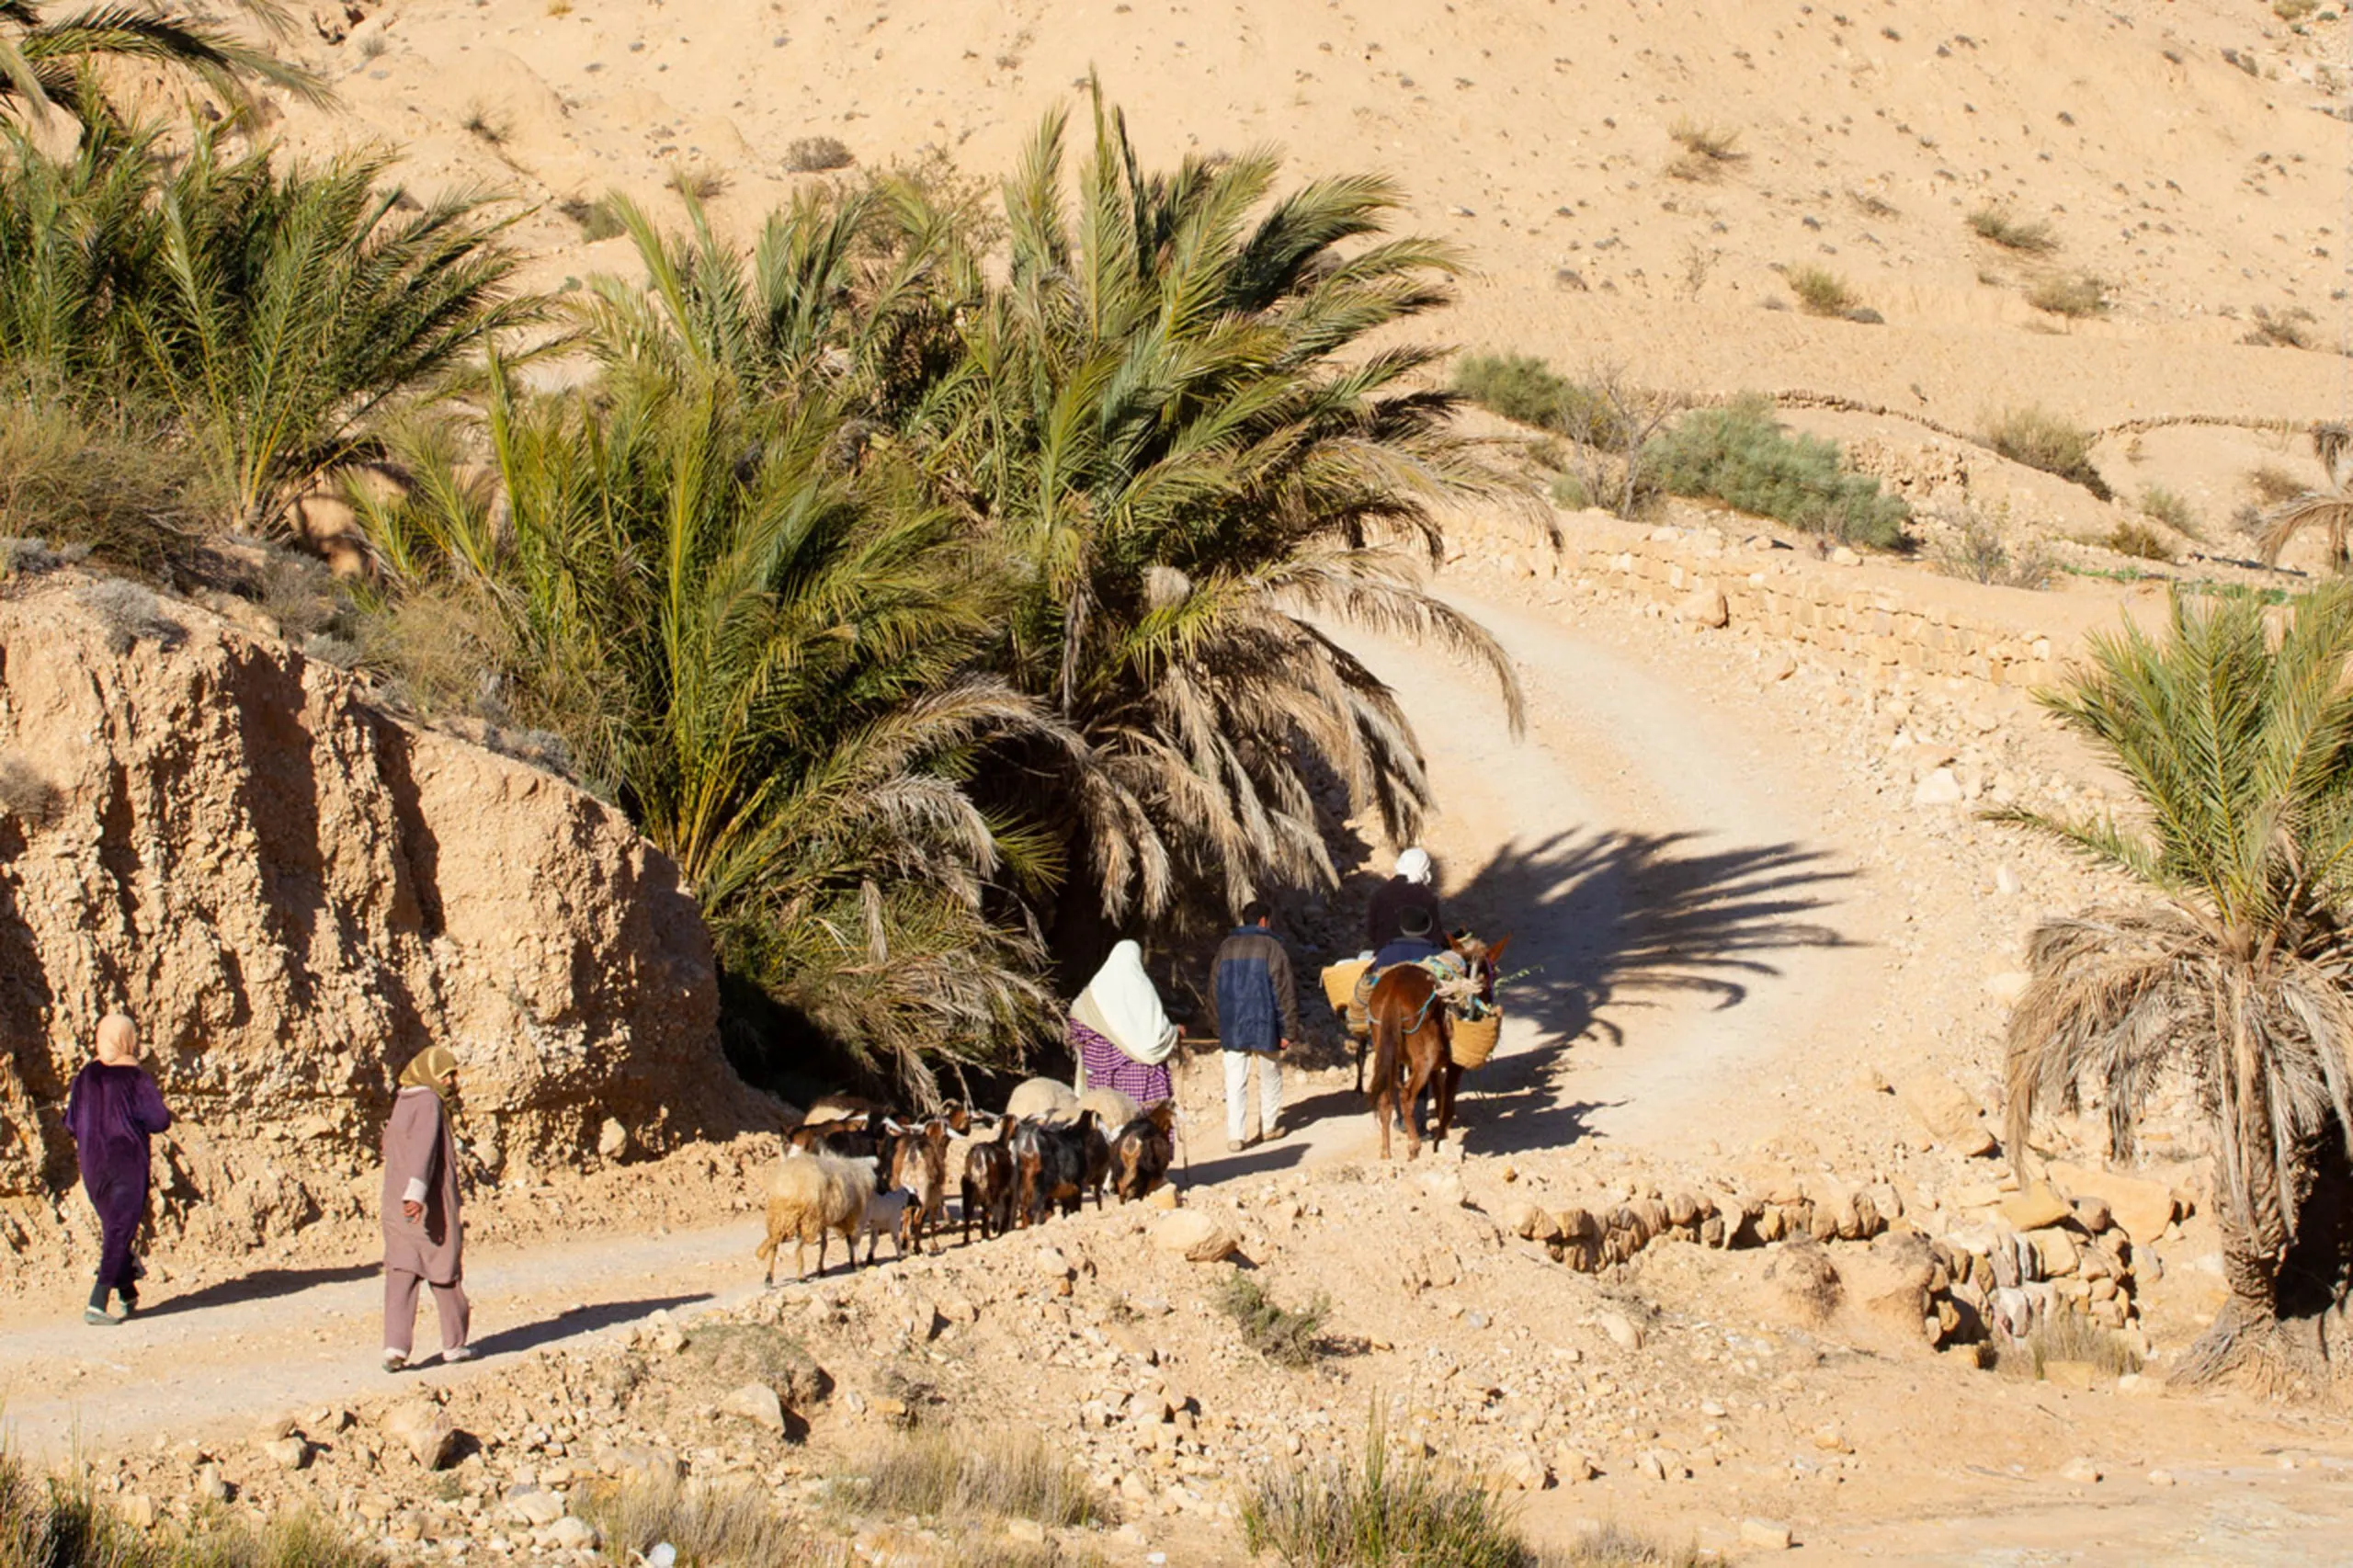 A family takes a dirt path home at the end of the day in the Sahara Desert.